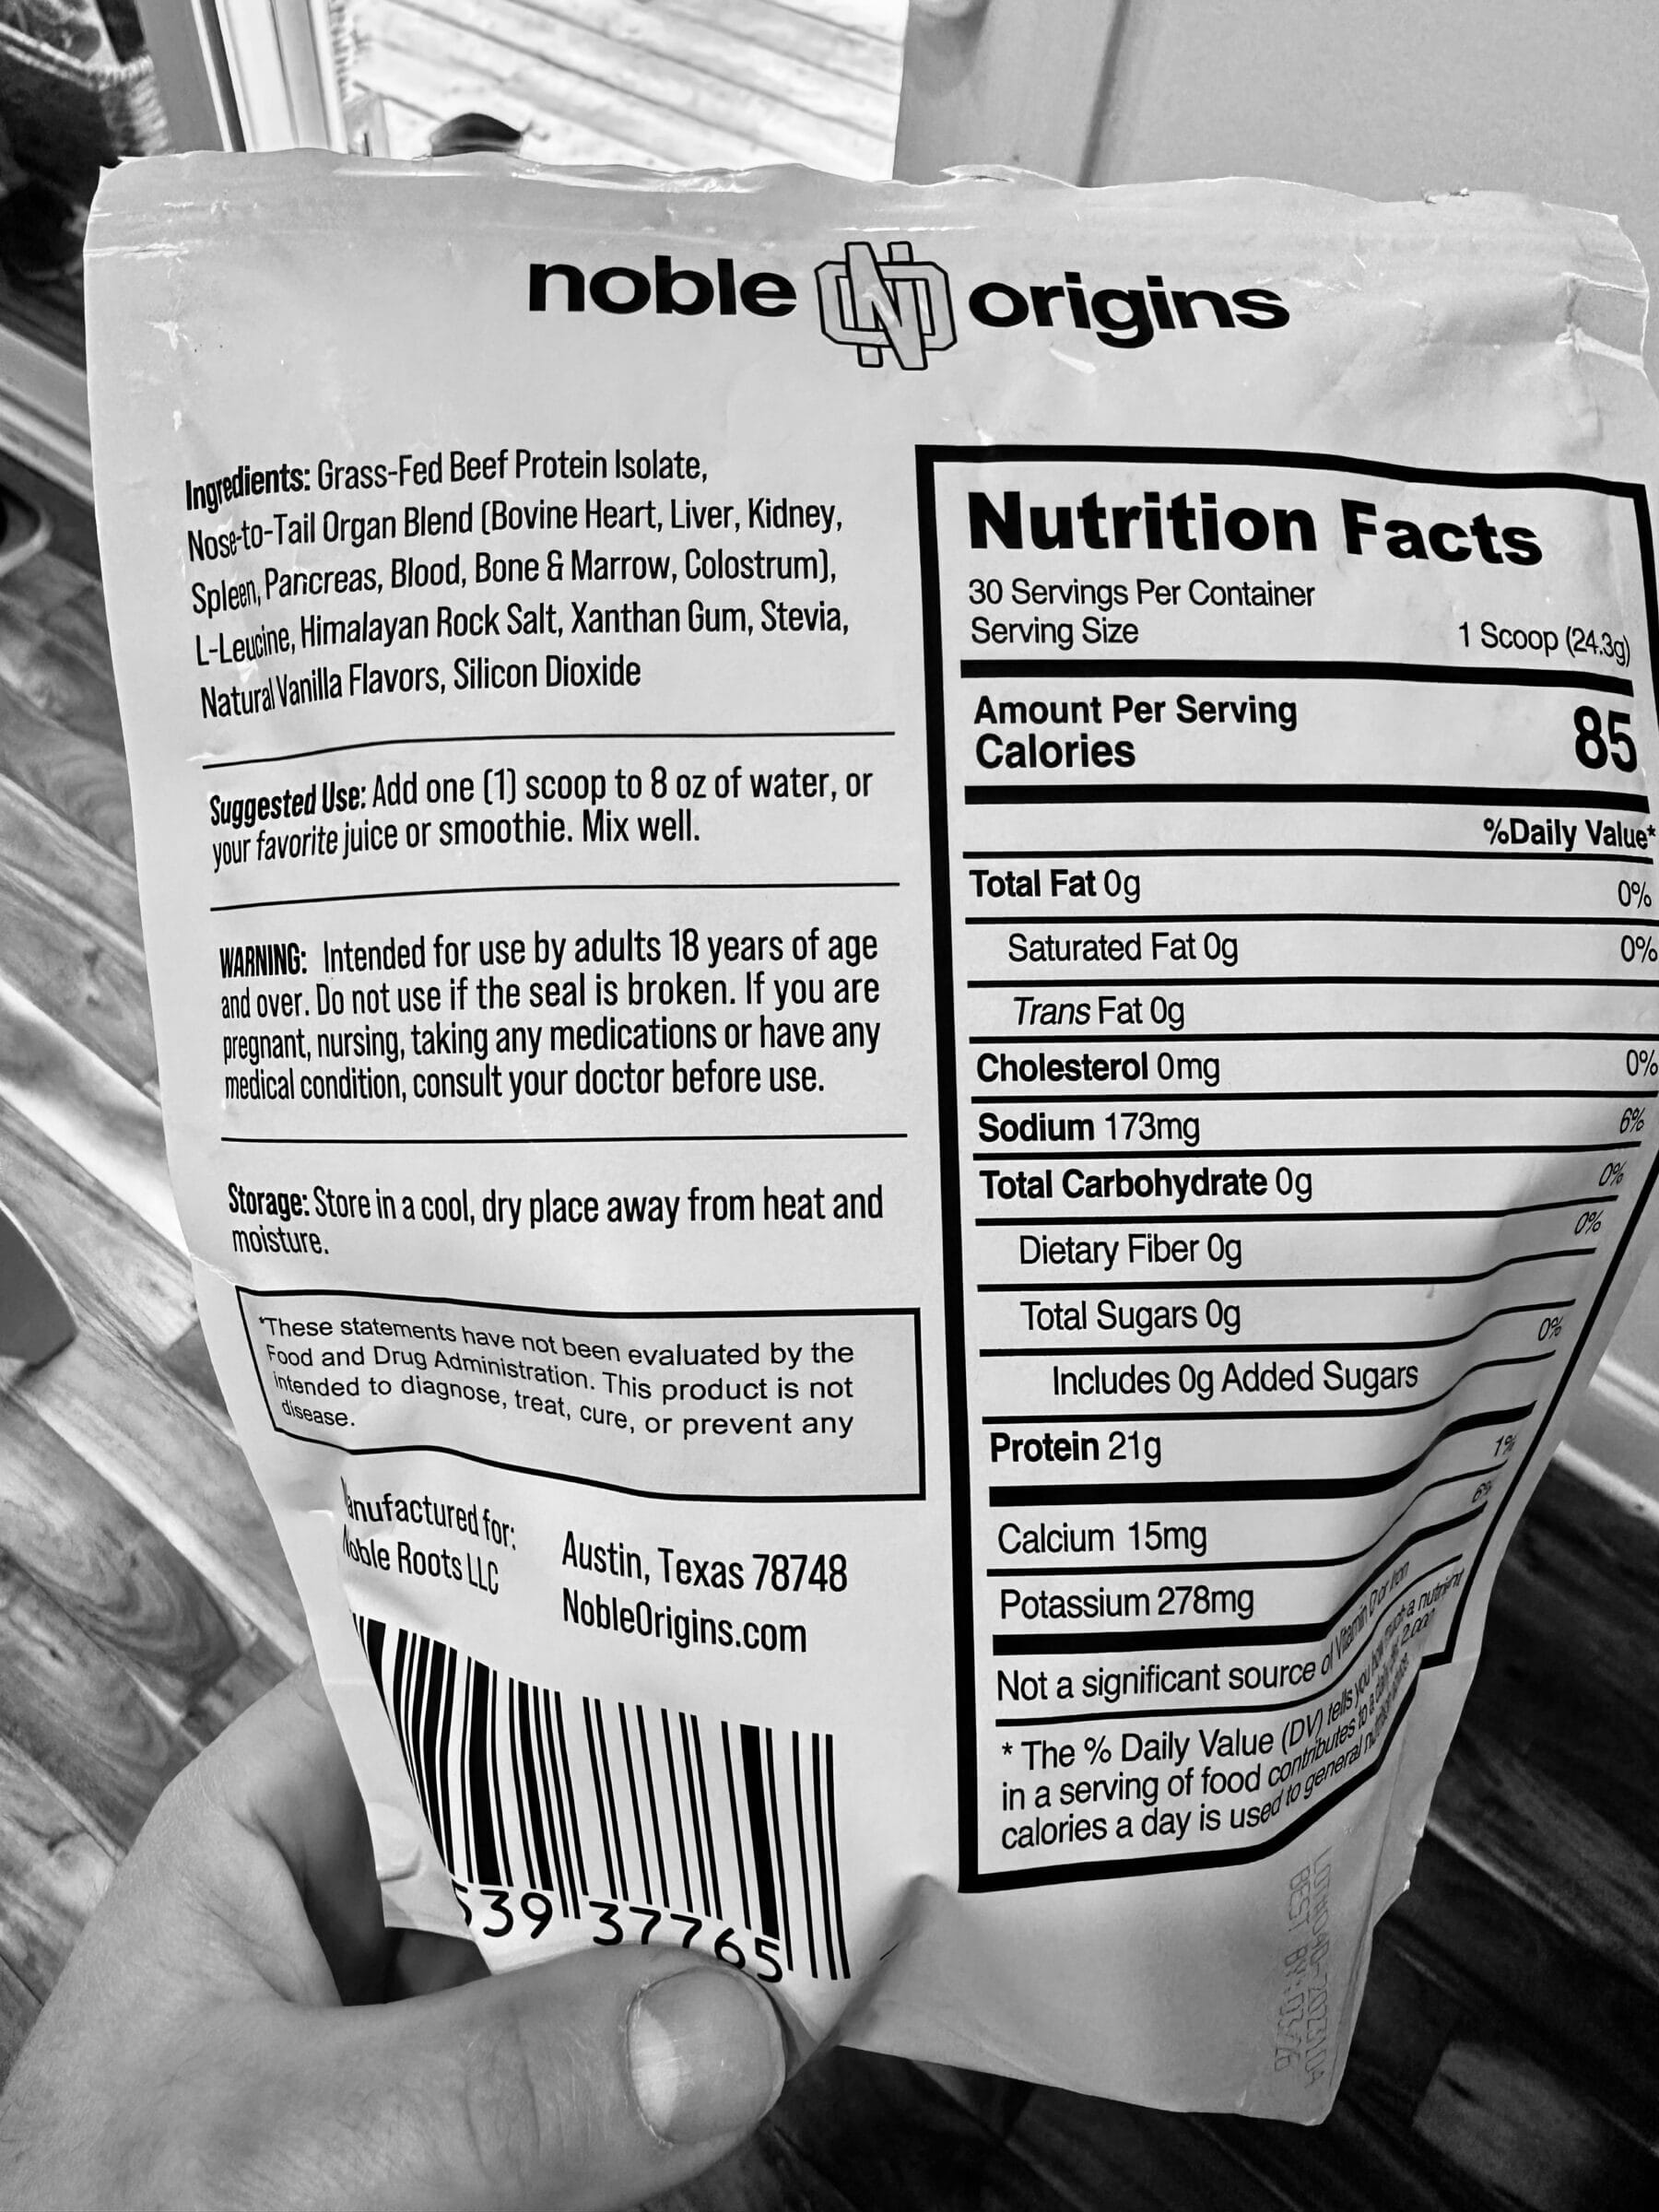 Noble features non-GMO ingredients.